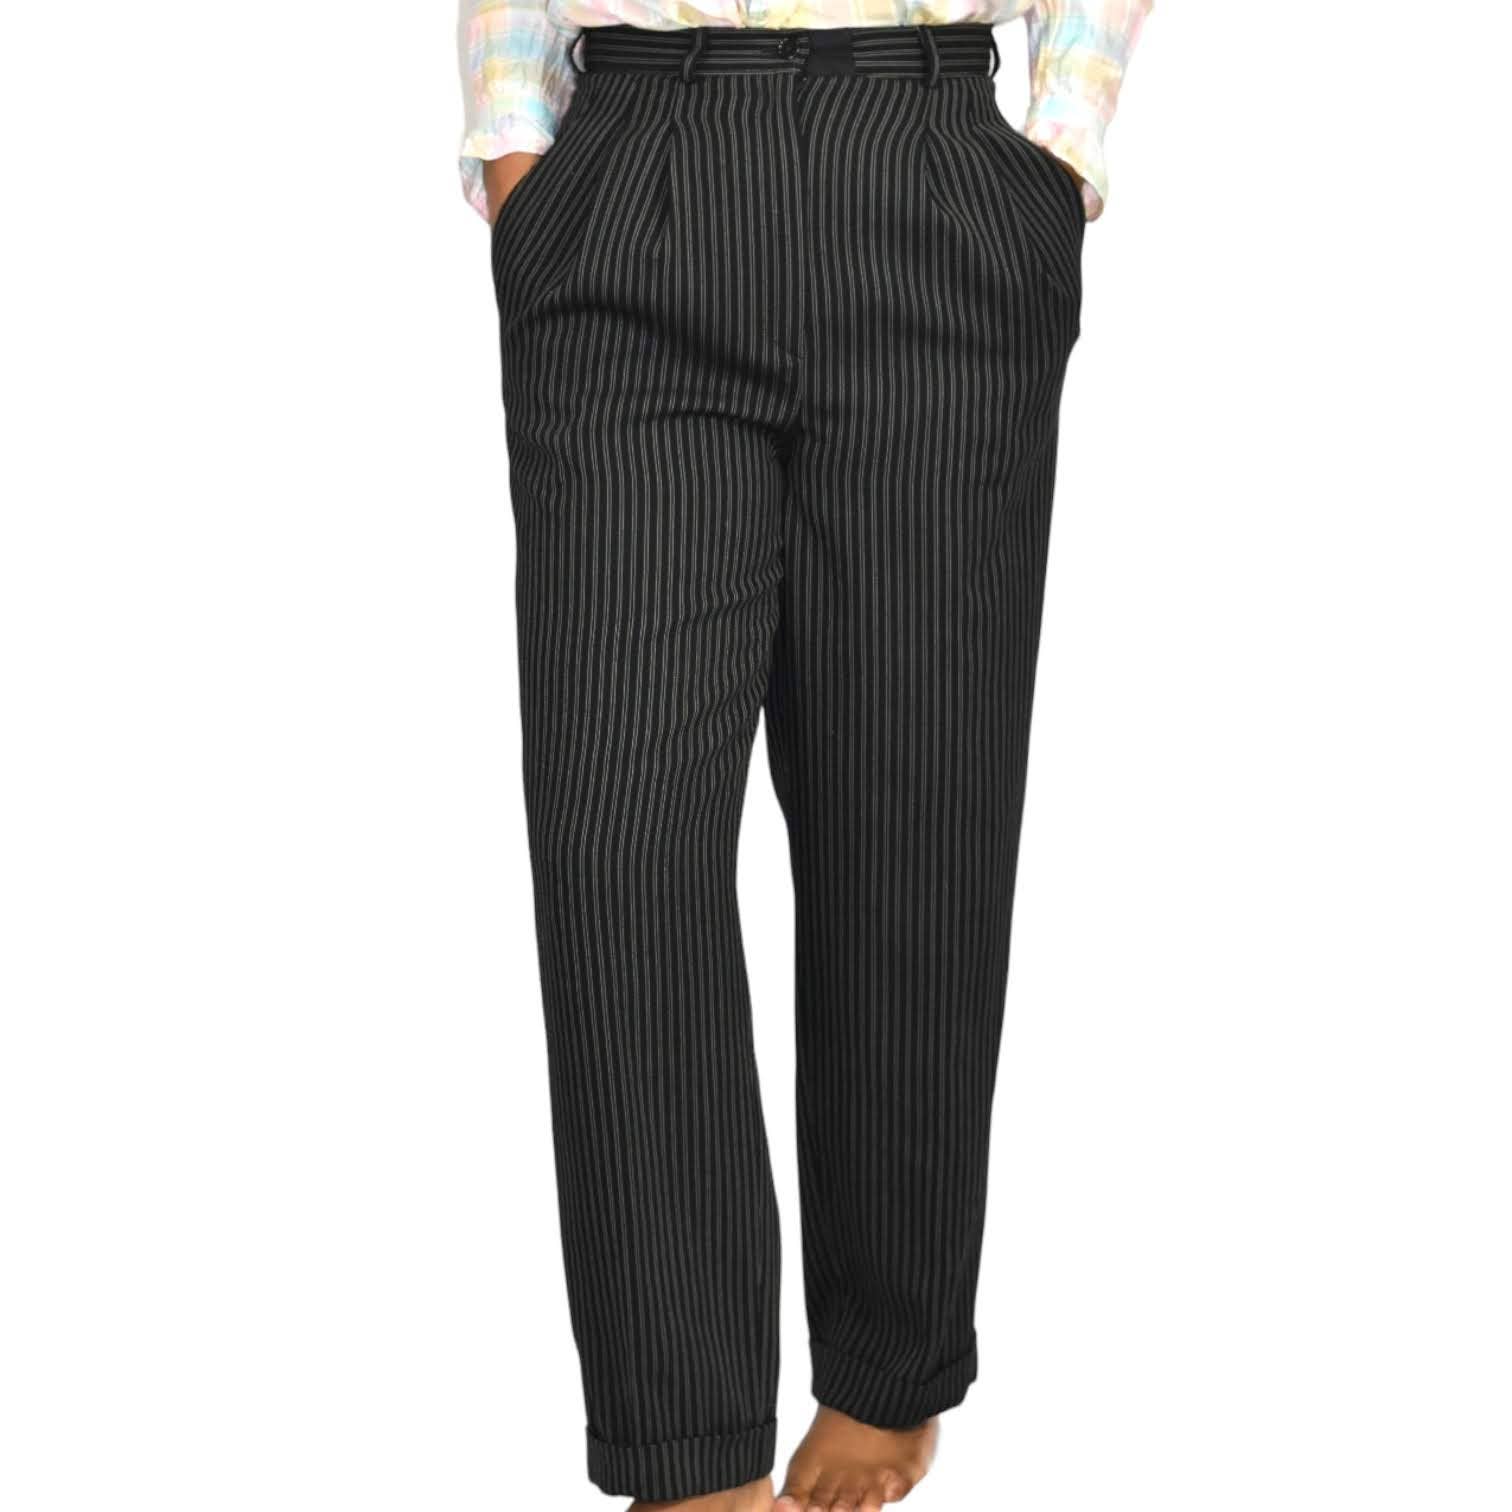 Whistles Dress Pants Pinstriped Black Pleated Wool Cuffed Trouser Striped Size 6